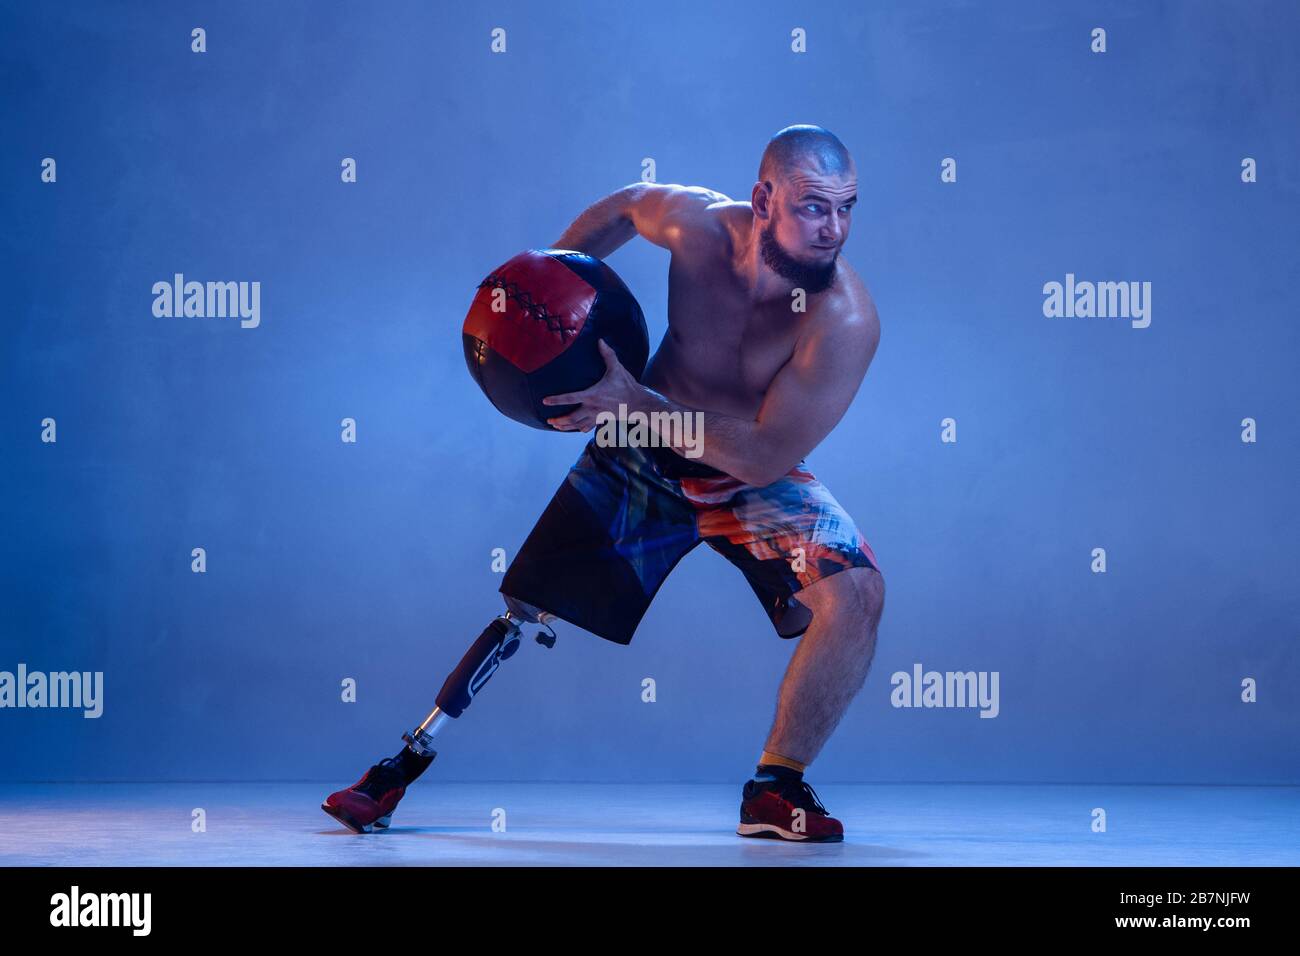 Athlete with disabilities or amputee isolated on blue studio background. Professional male sportsman with leg prosthesis training with ball in neon. Disabled sport and overcoming, wellness concept. Stock Photo